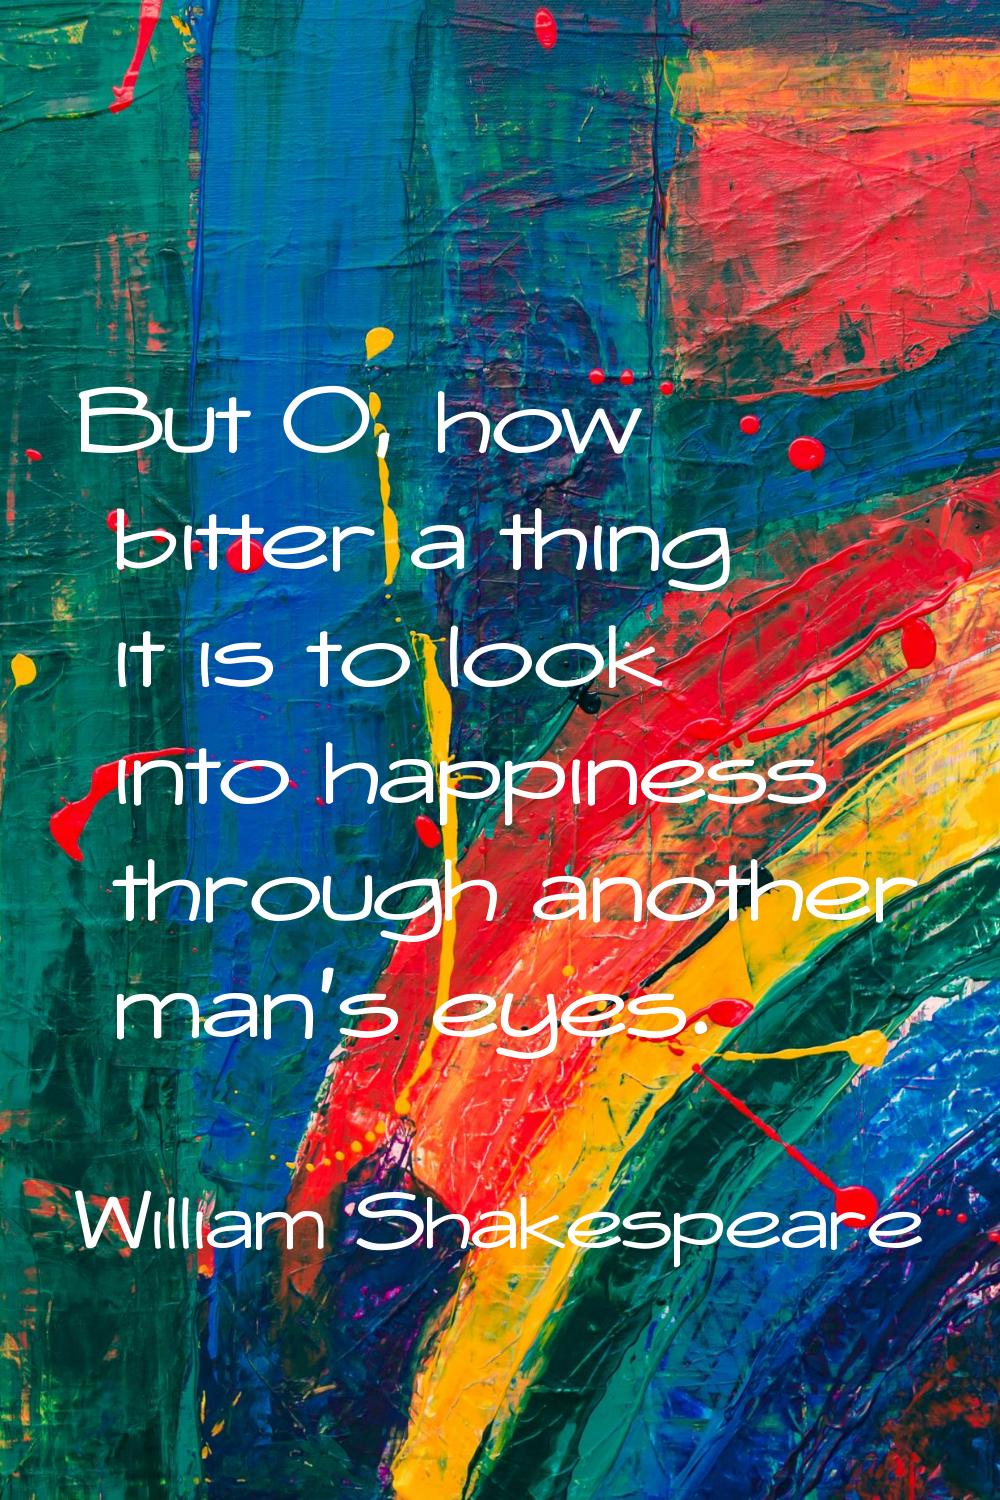 But O, how bitter a thing it is to look into happiness through another man's eyes.